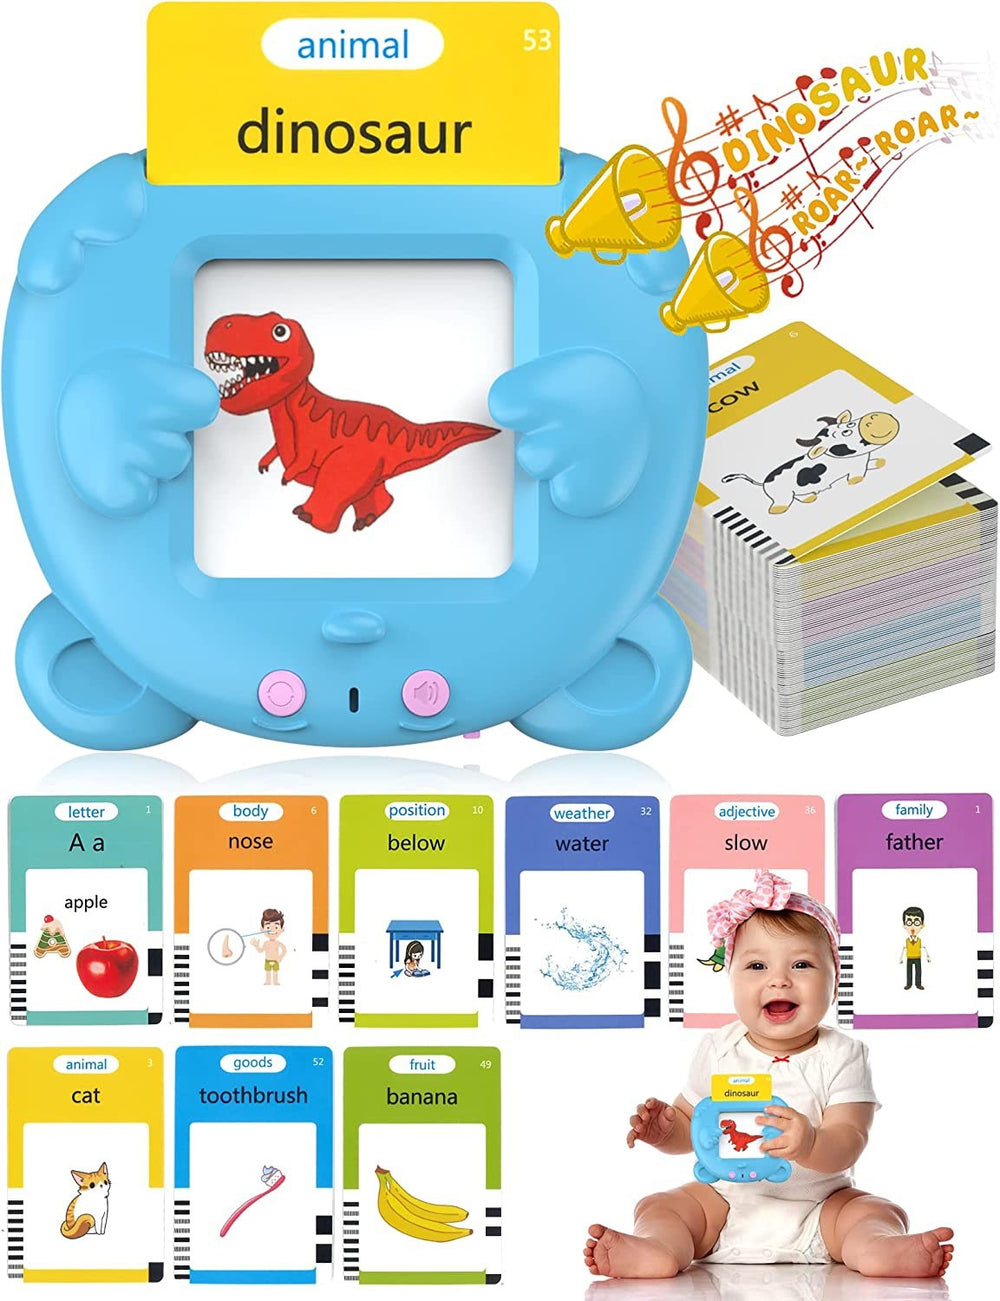 224cards Talking Flash Cards for Toddlers Flash Cards Kids Spanish/English Language Electronic Book Kids Educational Learning Toy